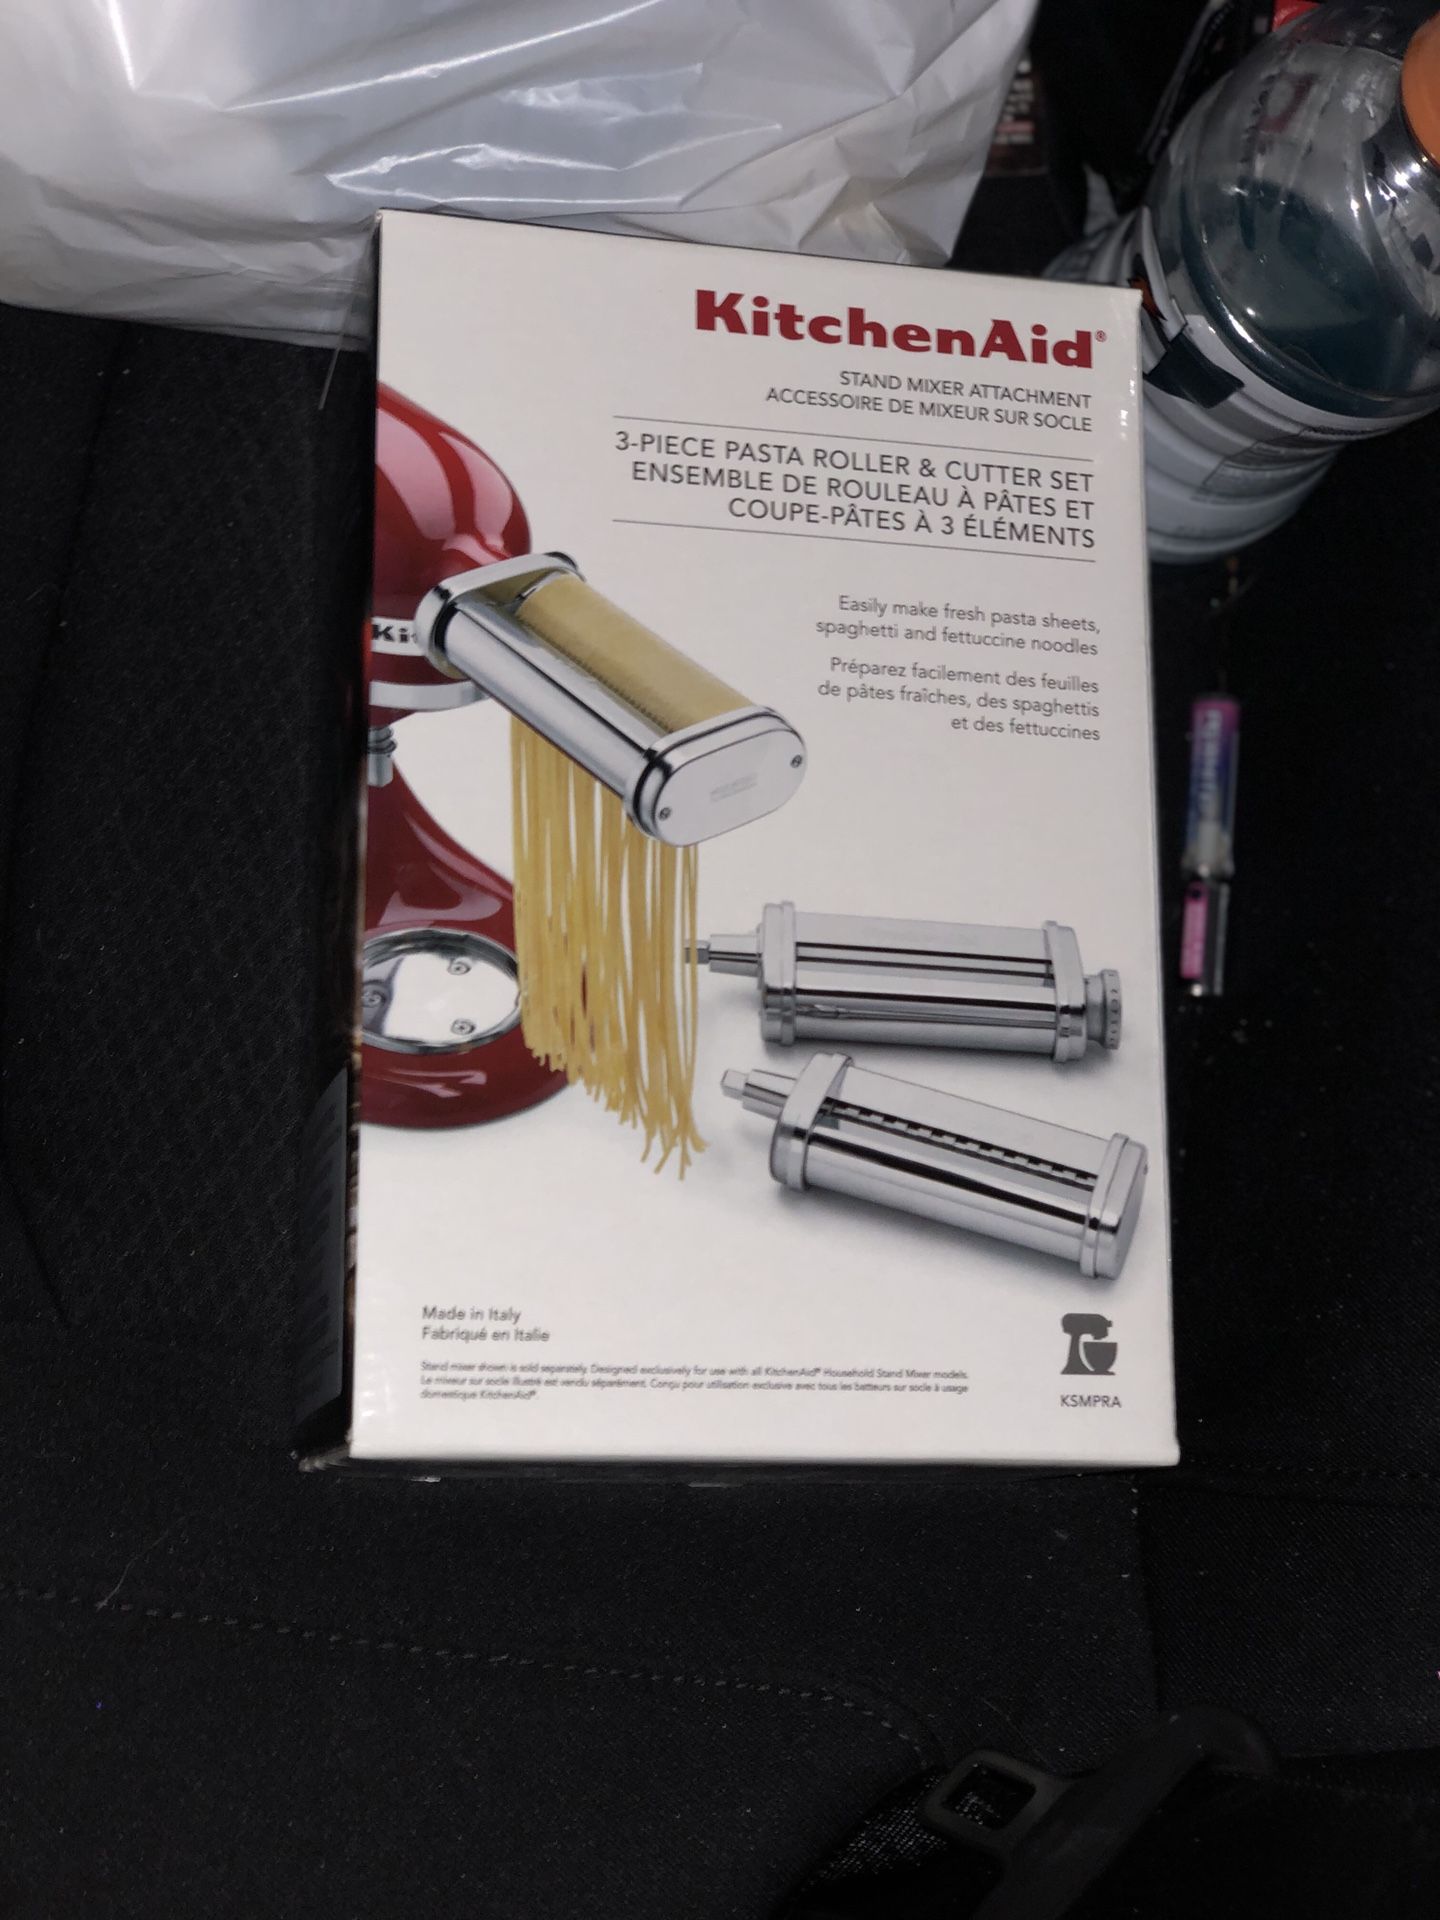 3 piece pasta roller and cutter!!!!! Add on to Kitchen Aid mixer!